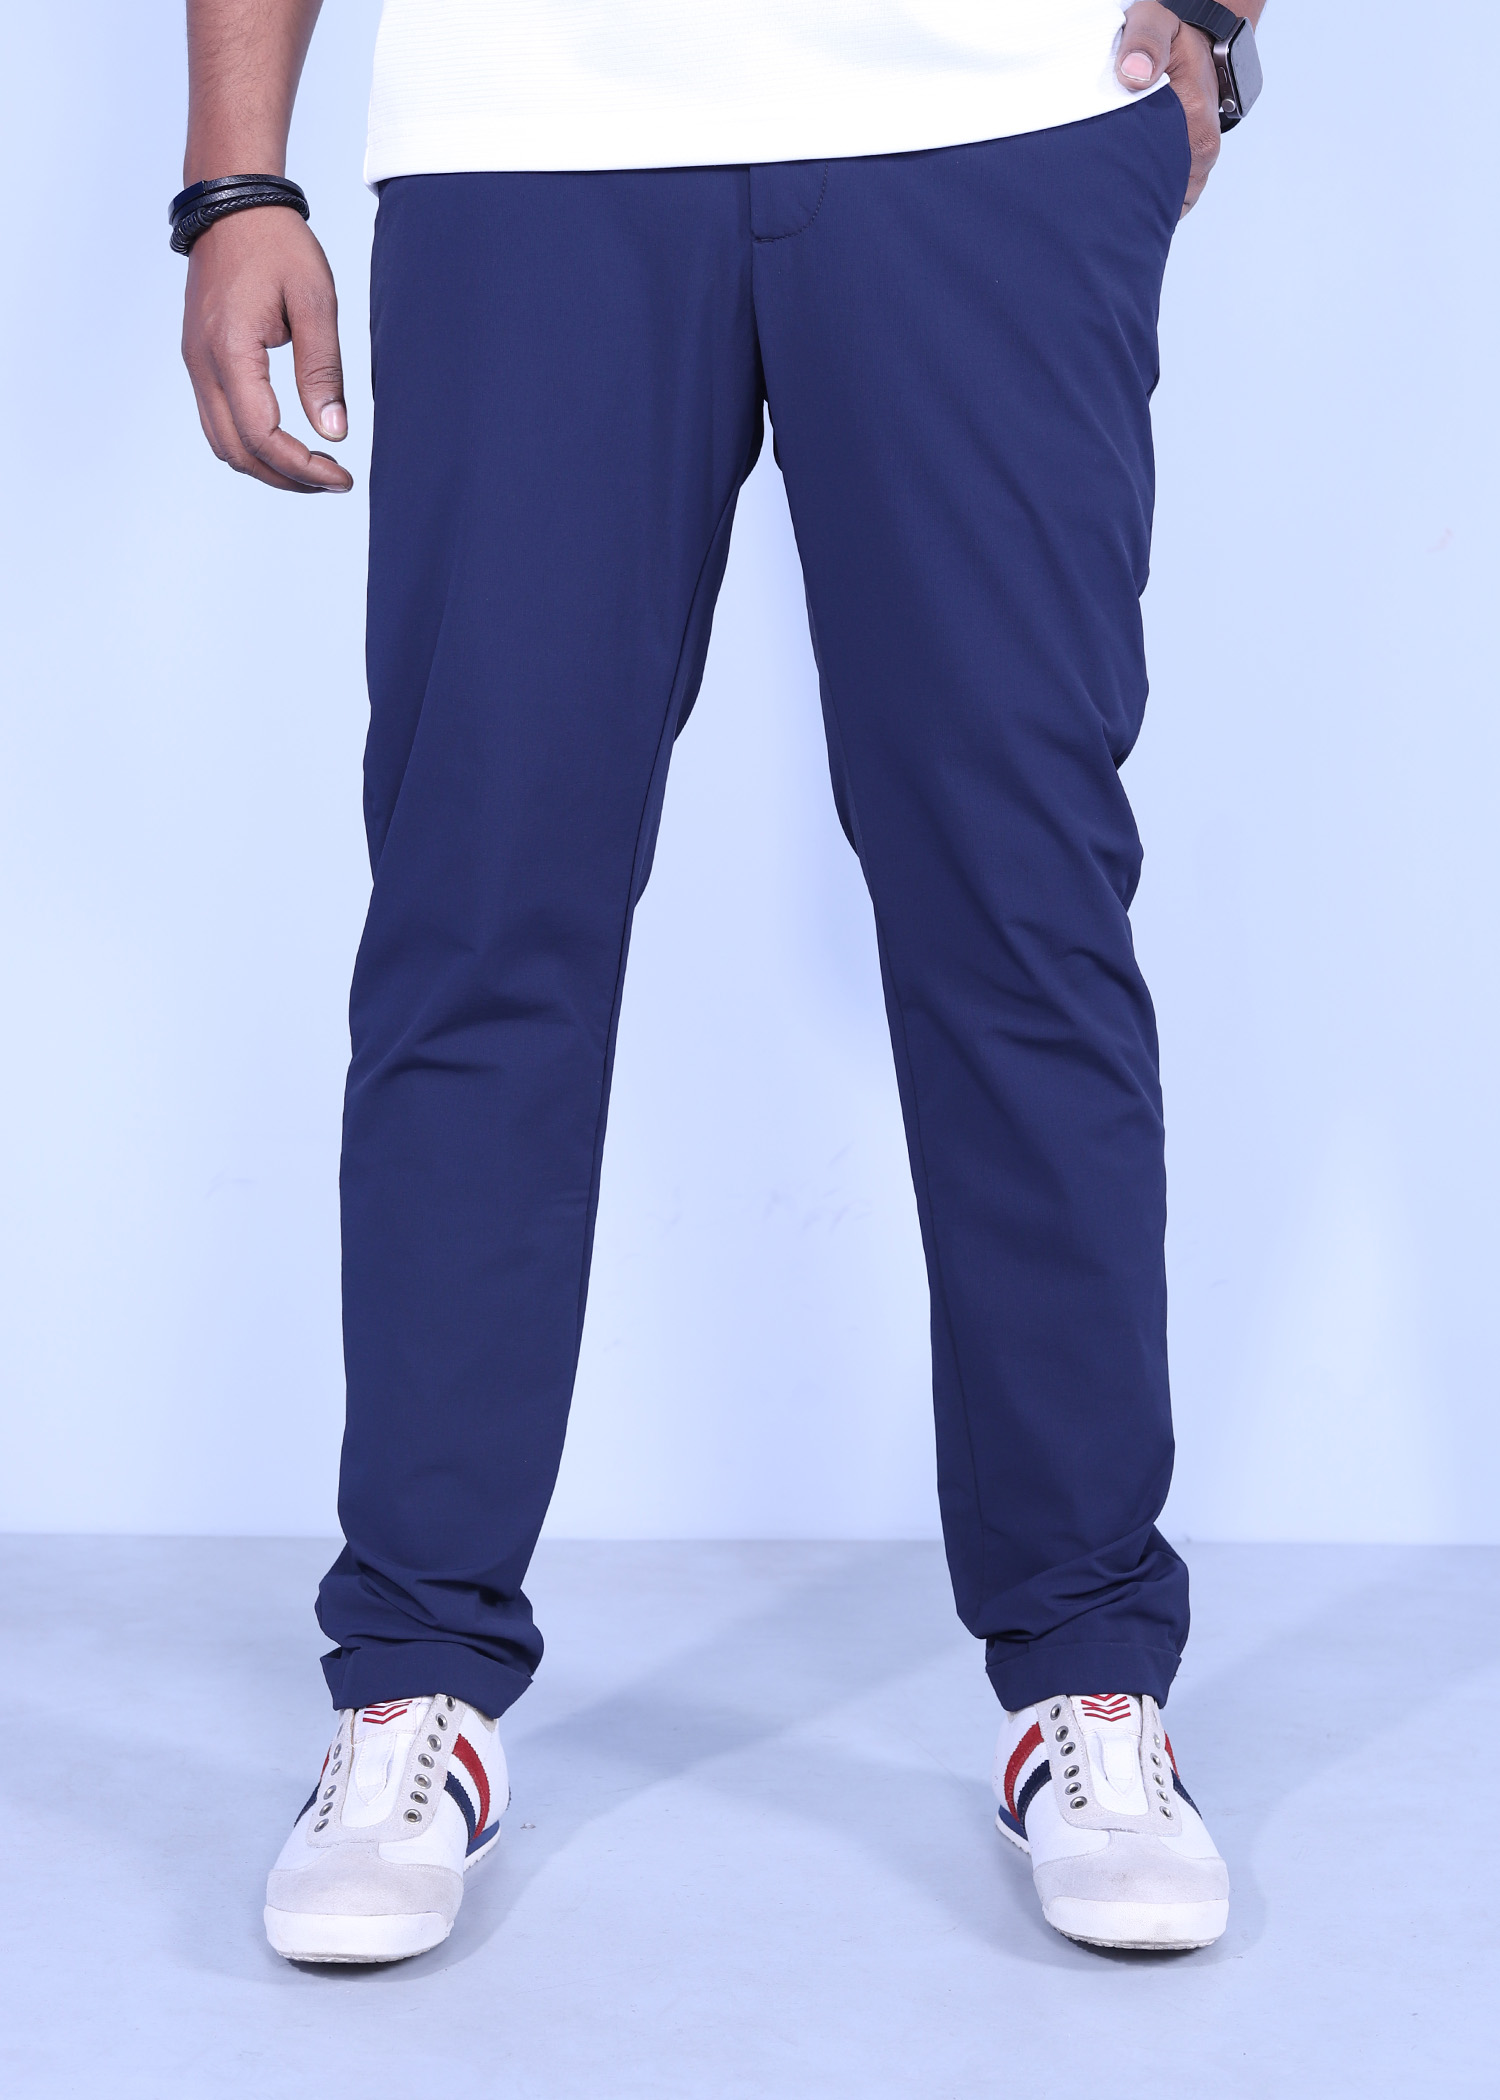 wren chino pant navy color half front view